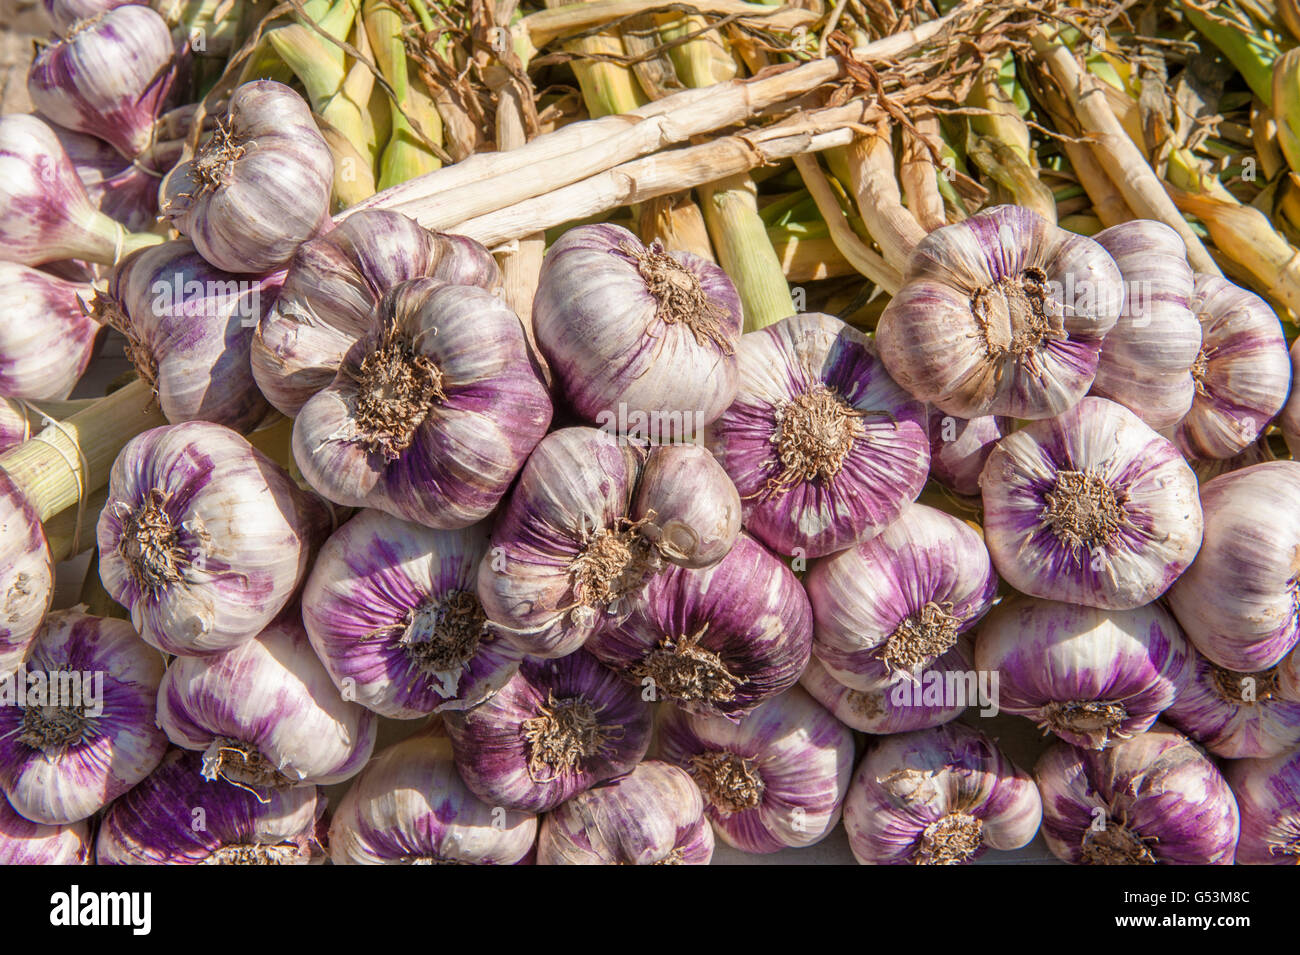 Heaps of garlic at a market in Gruissan, Languedoc, France Stock Photo